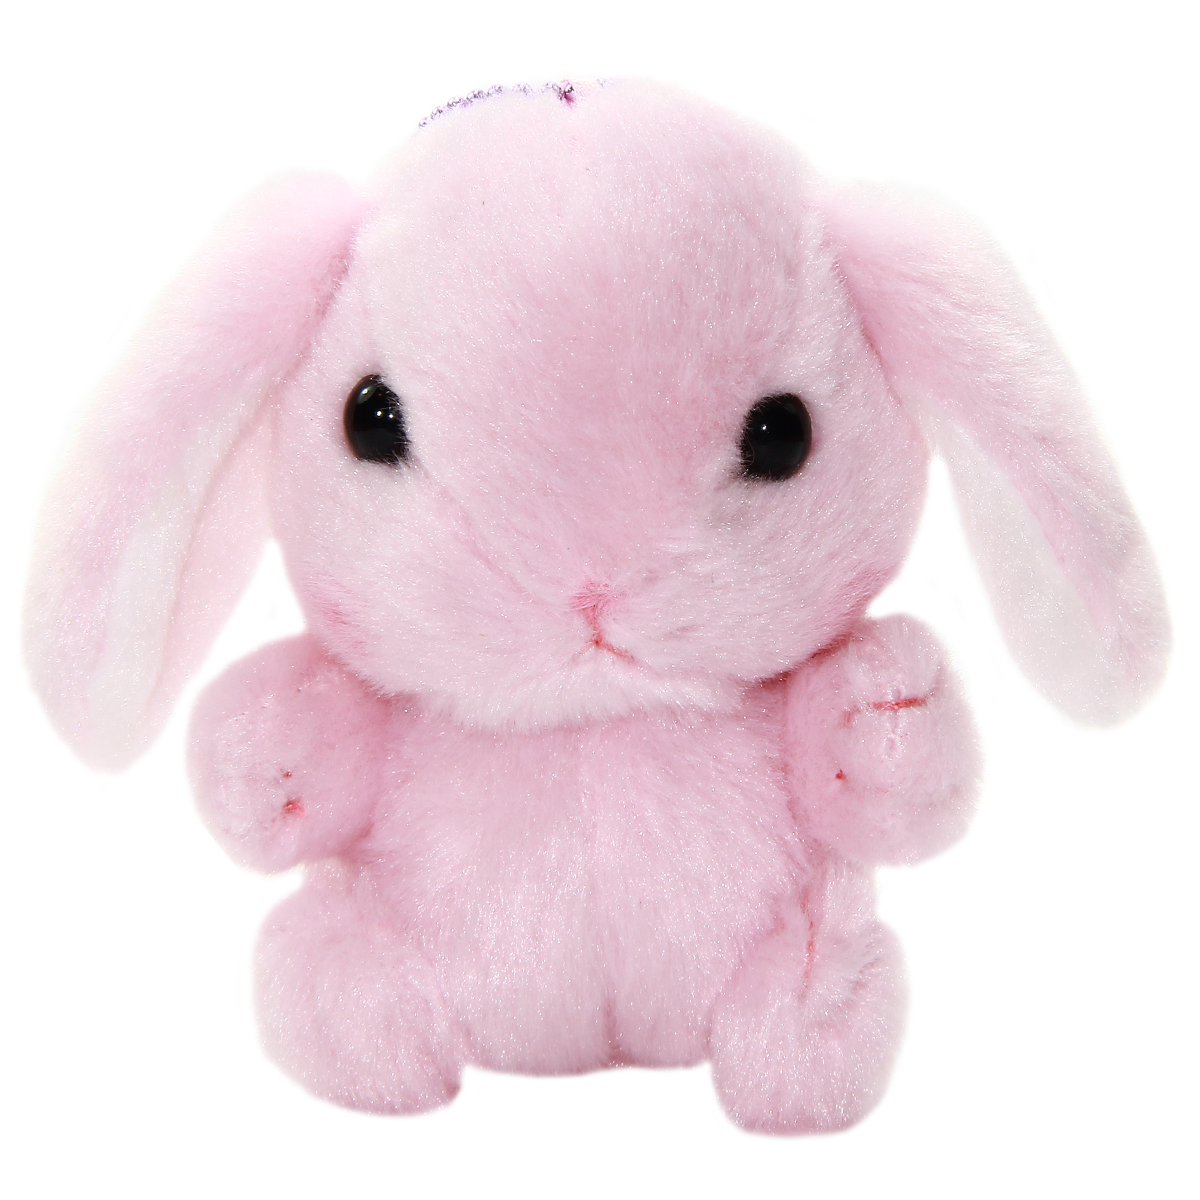 Amuse Gathering Bunny Plushie Collection Cute Stuffed Animal Toy Pink 4 Inches